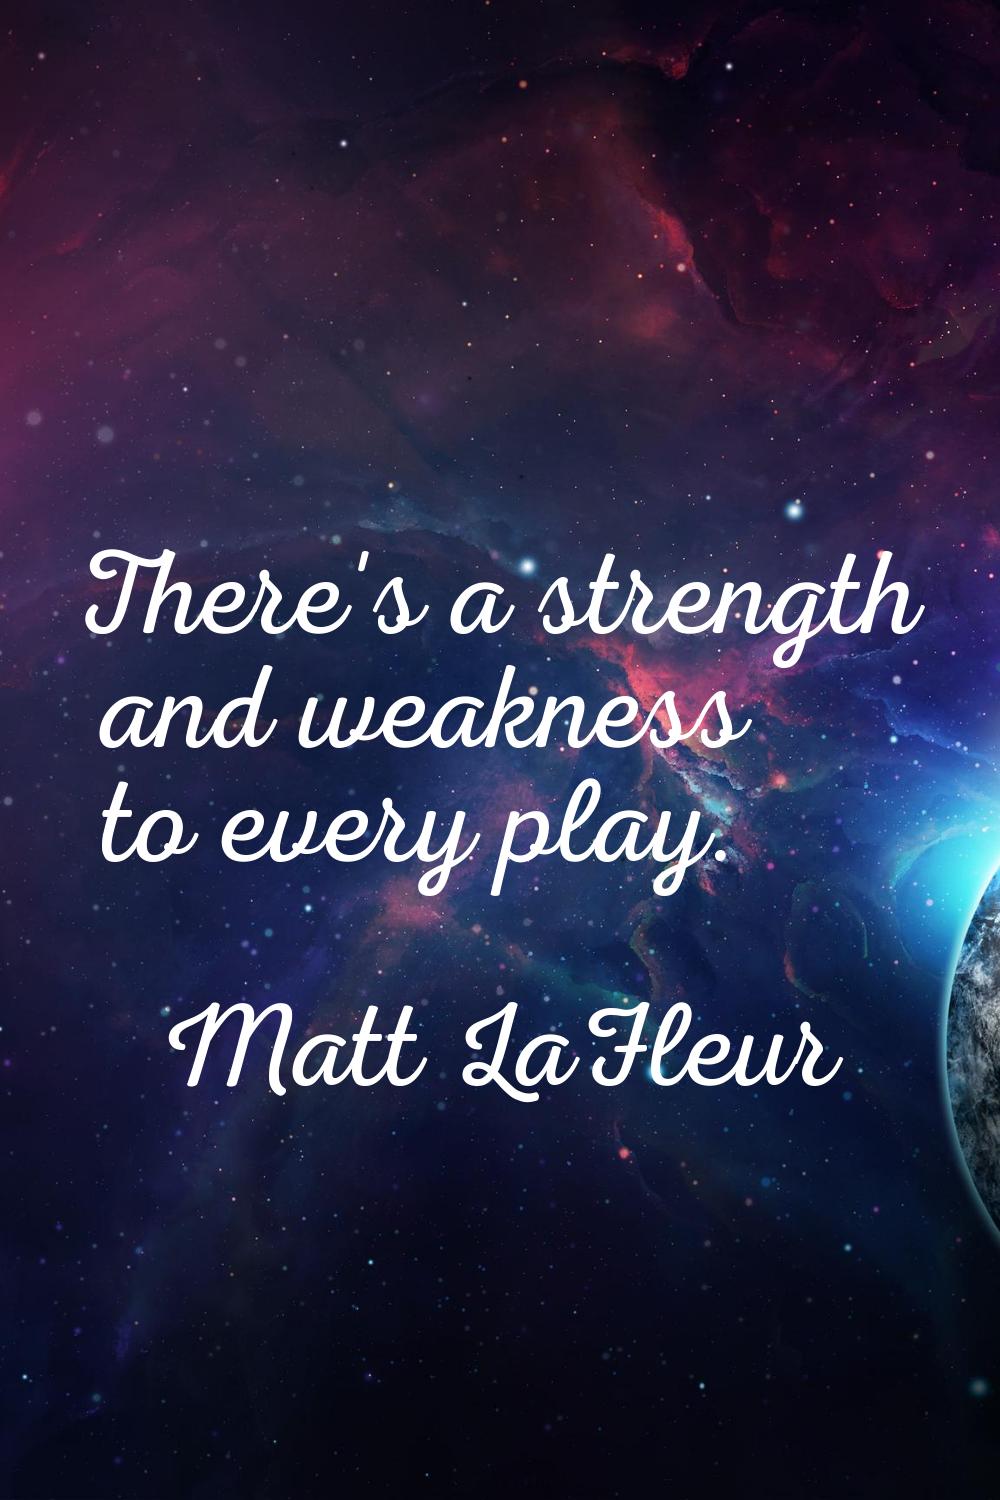 There's a strength and weakness to every play.